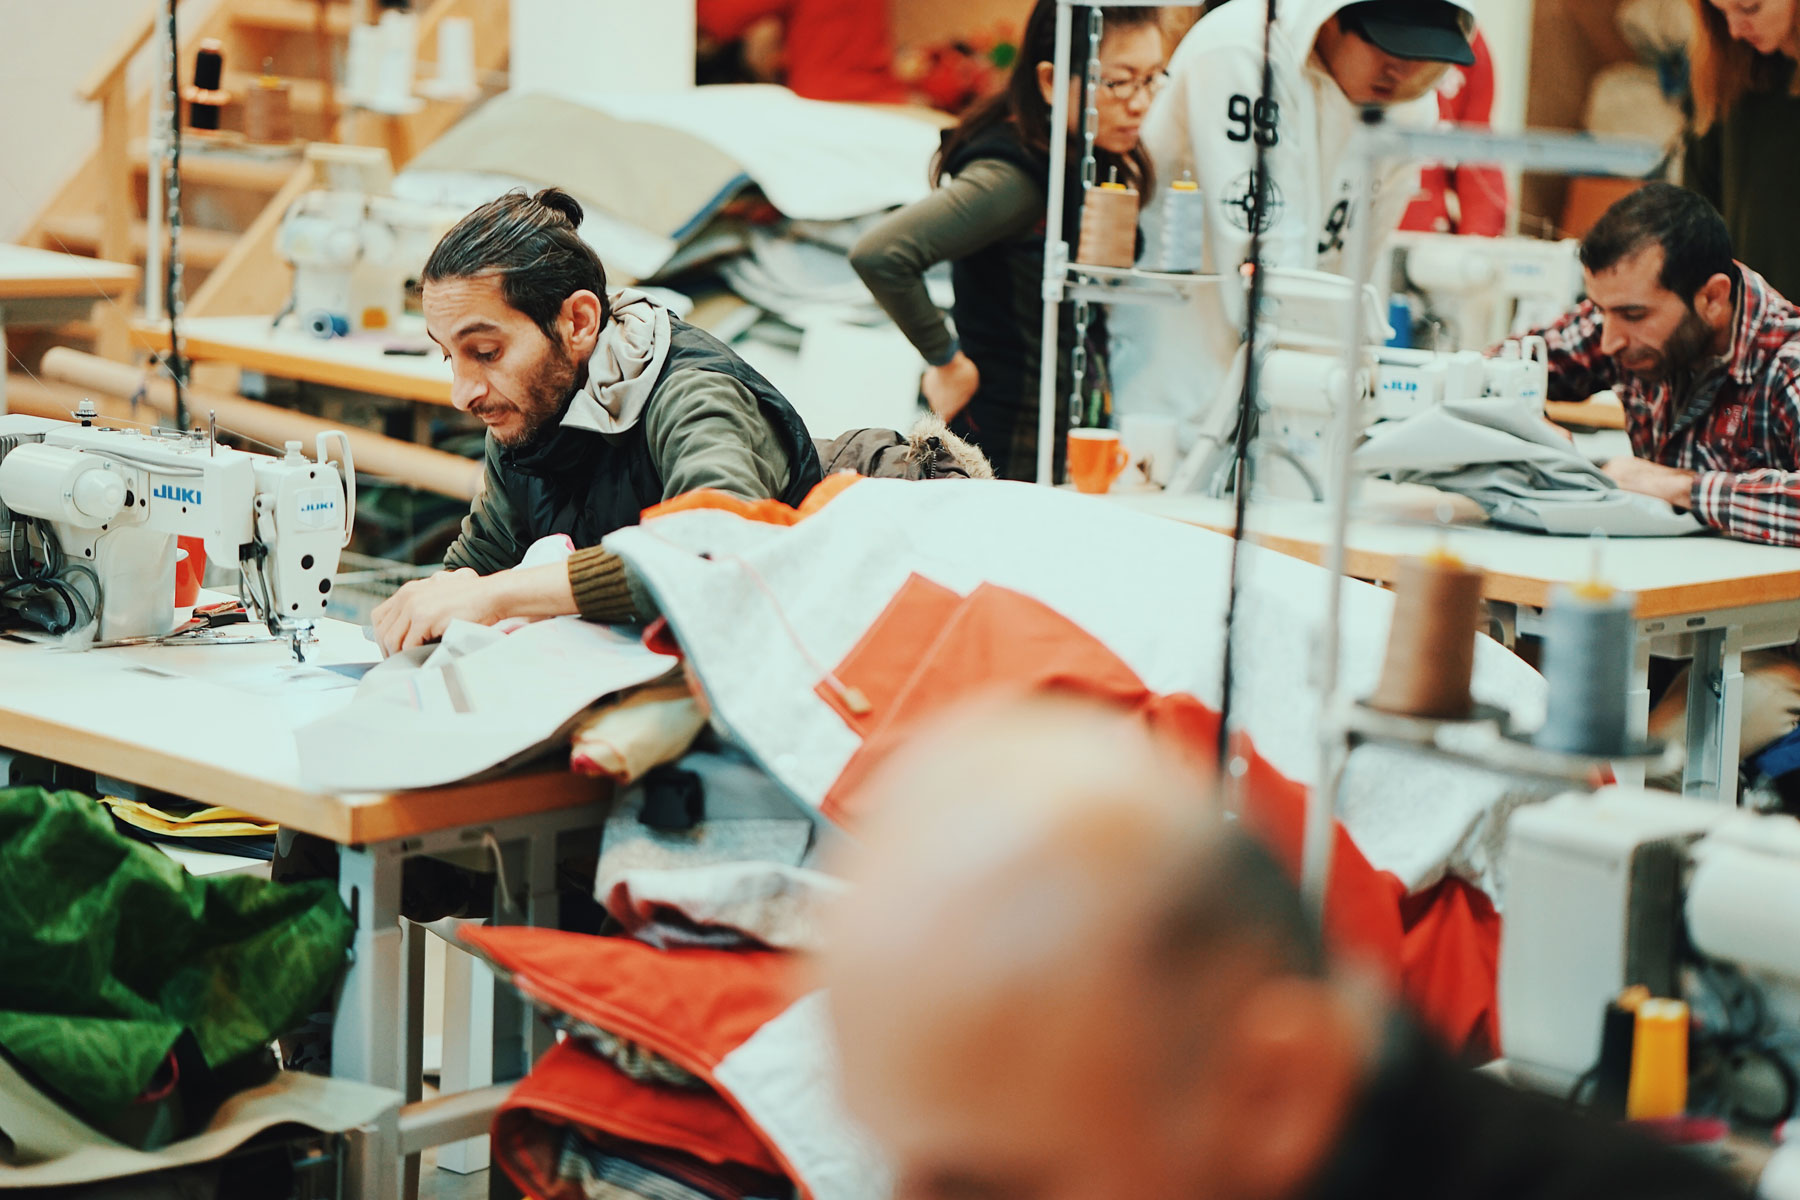 A social clothing factory where garments are made under ethically responsible working conditions. The expansion of the Sheltersuit organisation comes after a relocation to a new office building and larger production facility within the city of Enschede in the Netherlands.